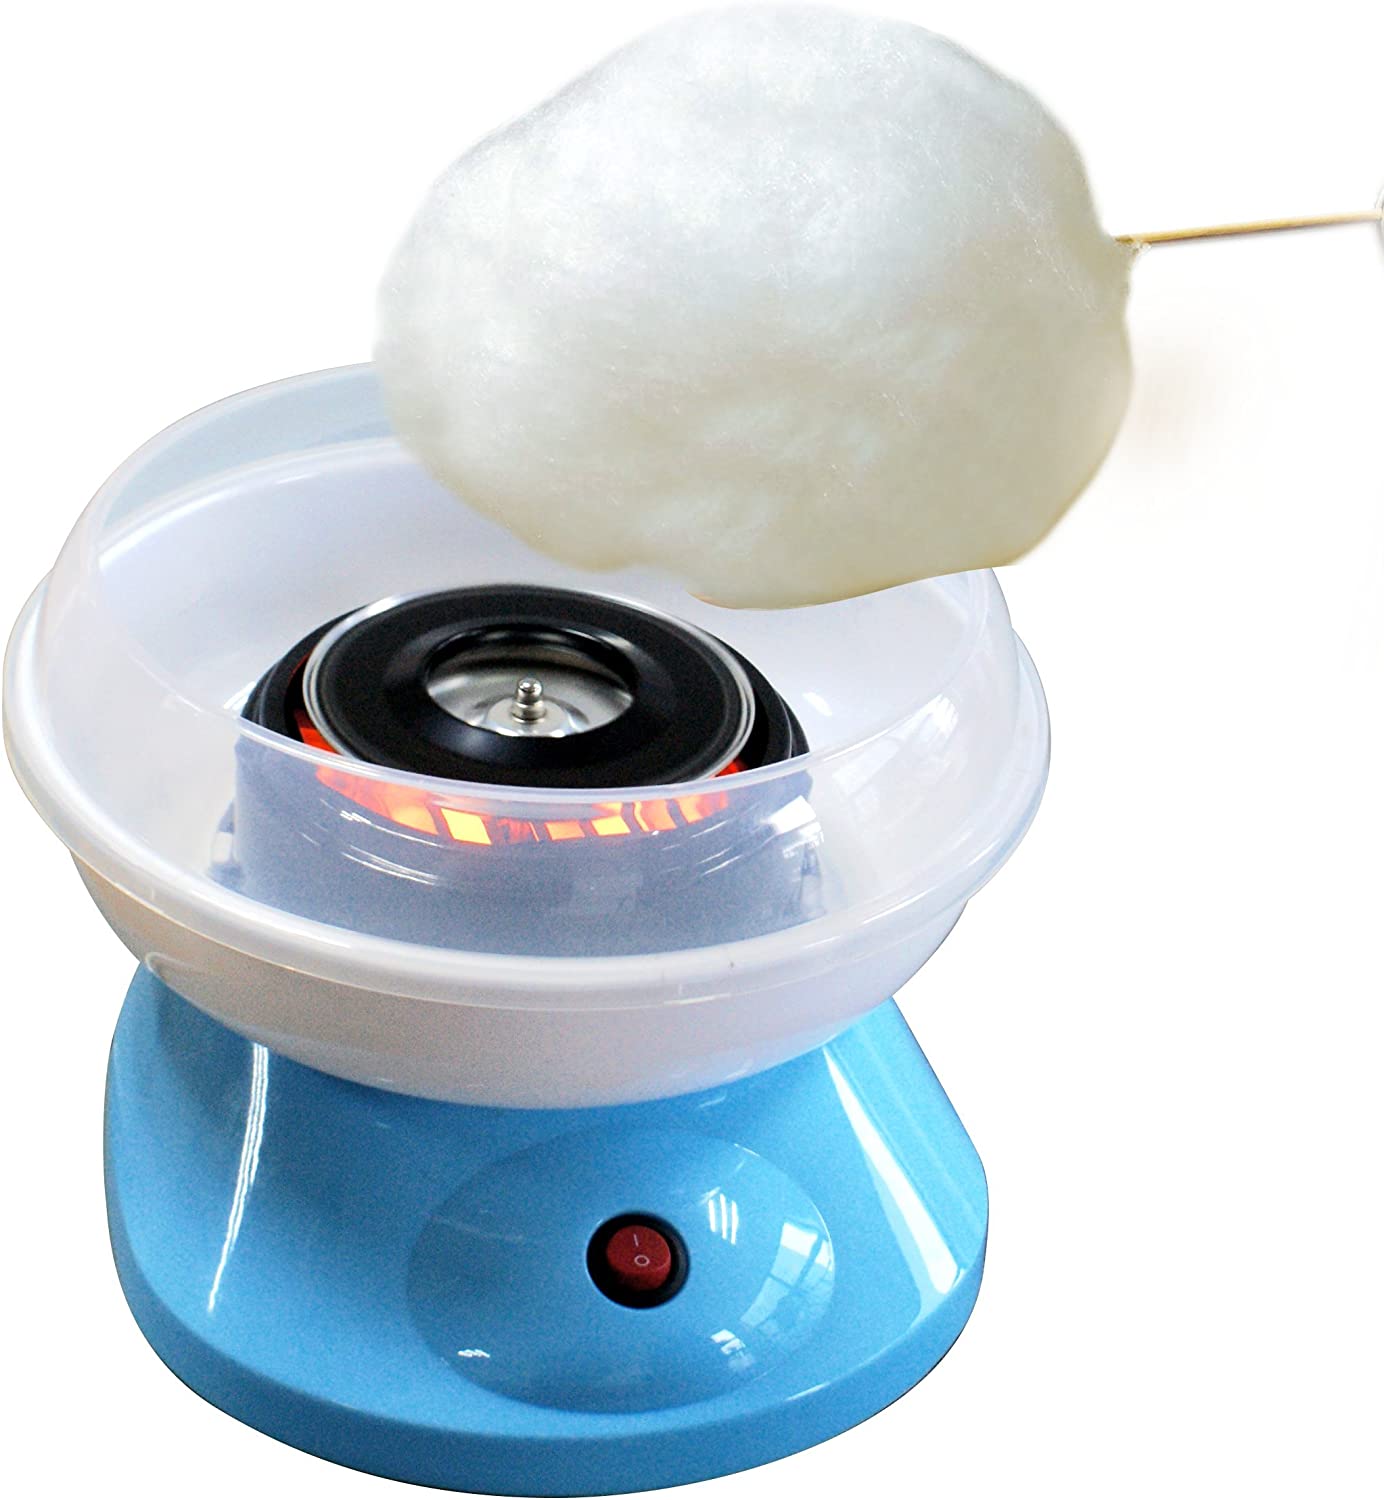 Syntrox Germany ZWM 500 W Electric Cotton Candy Machine Cotton Candy Maker